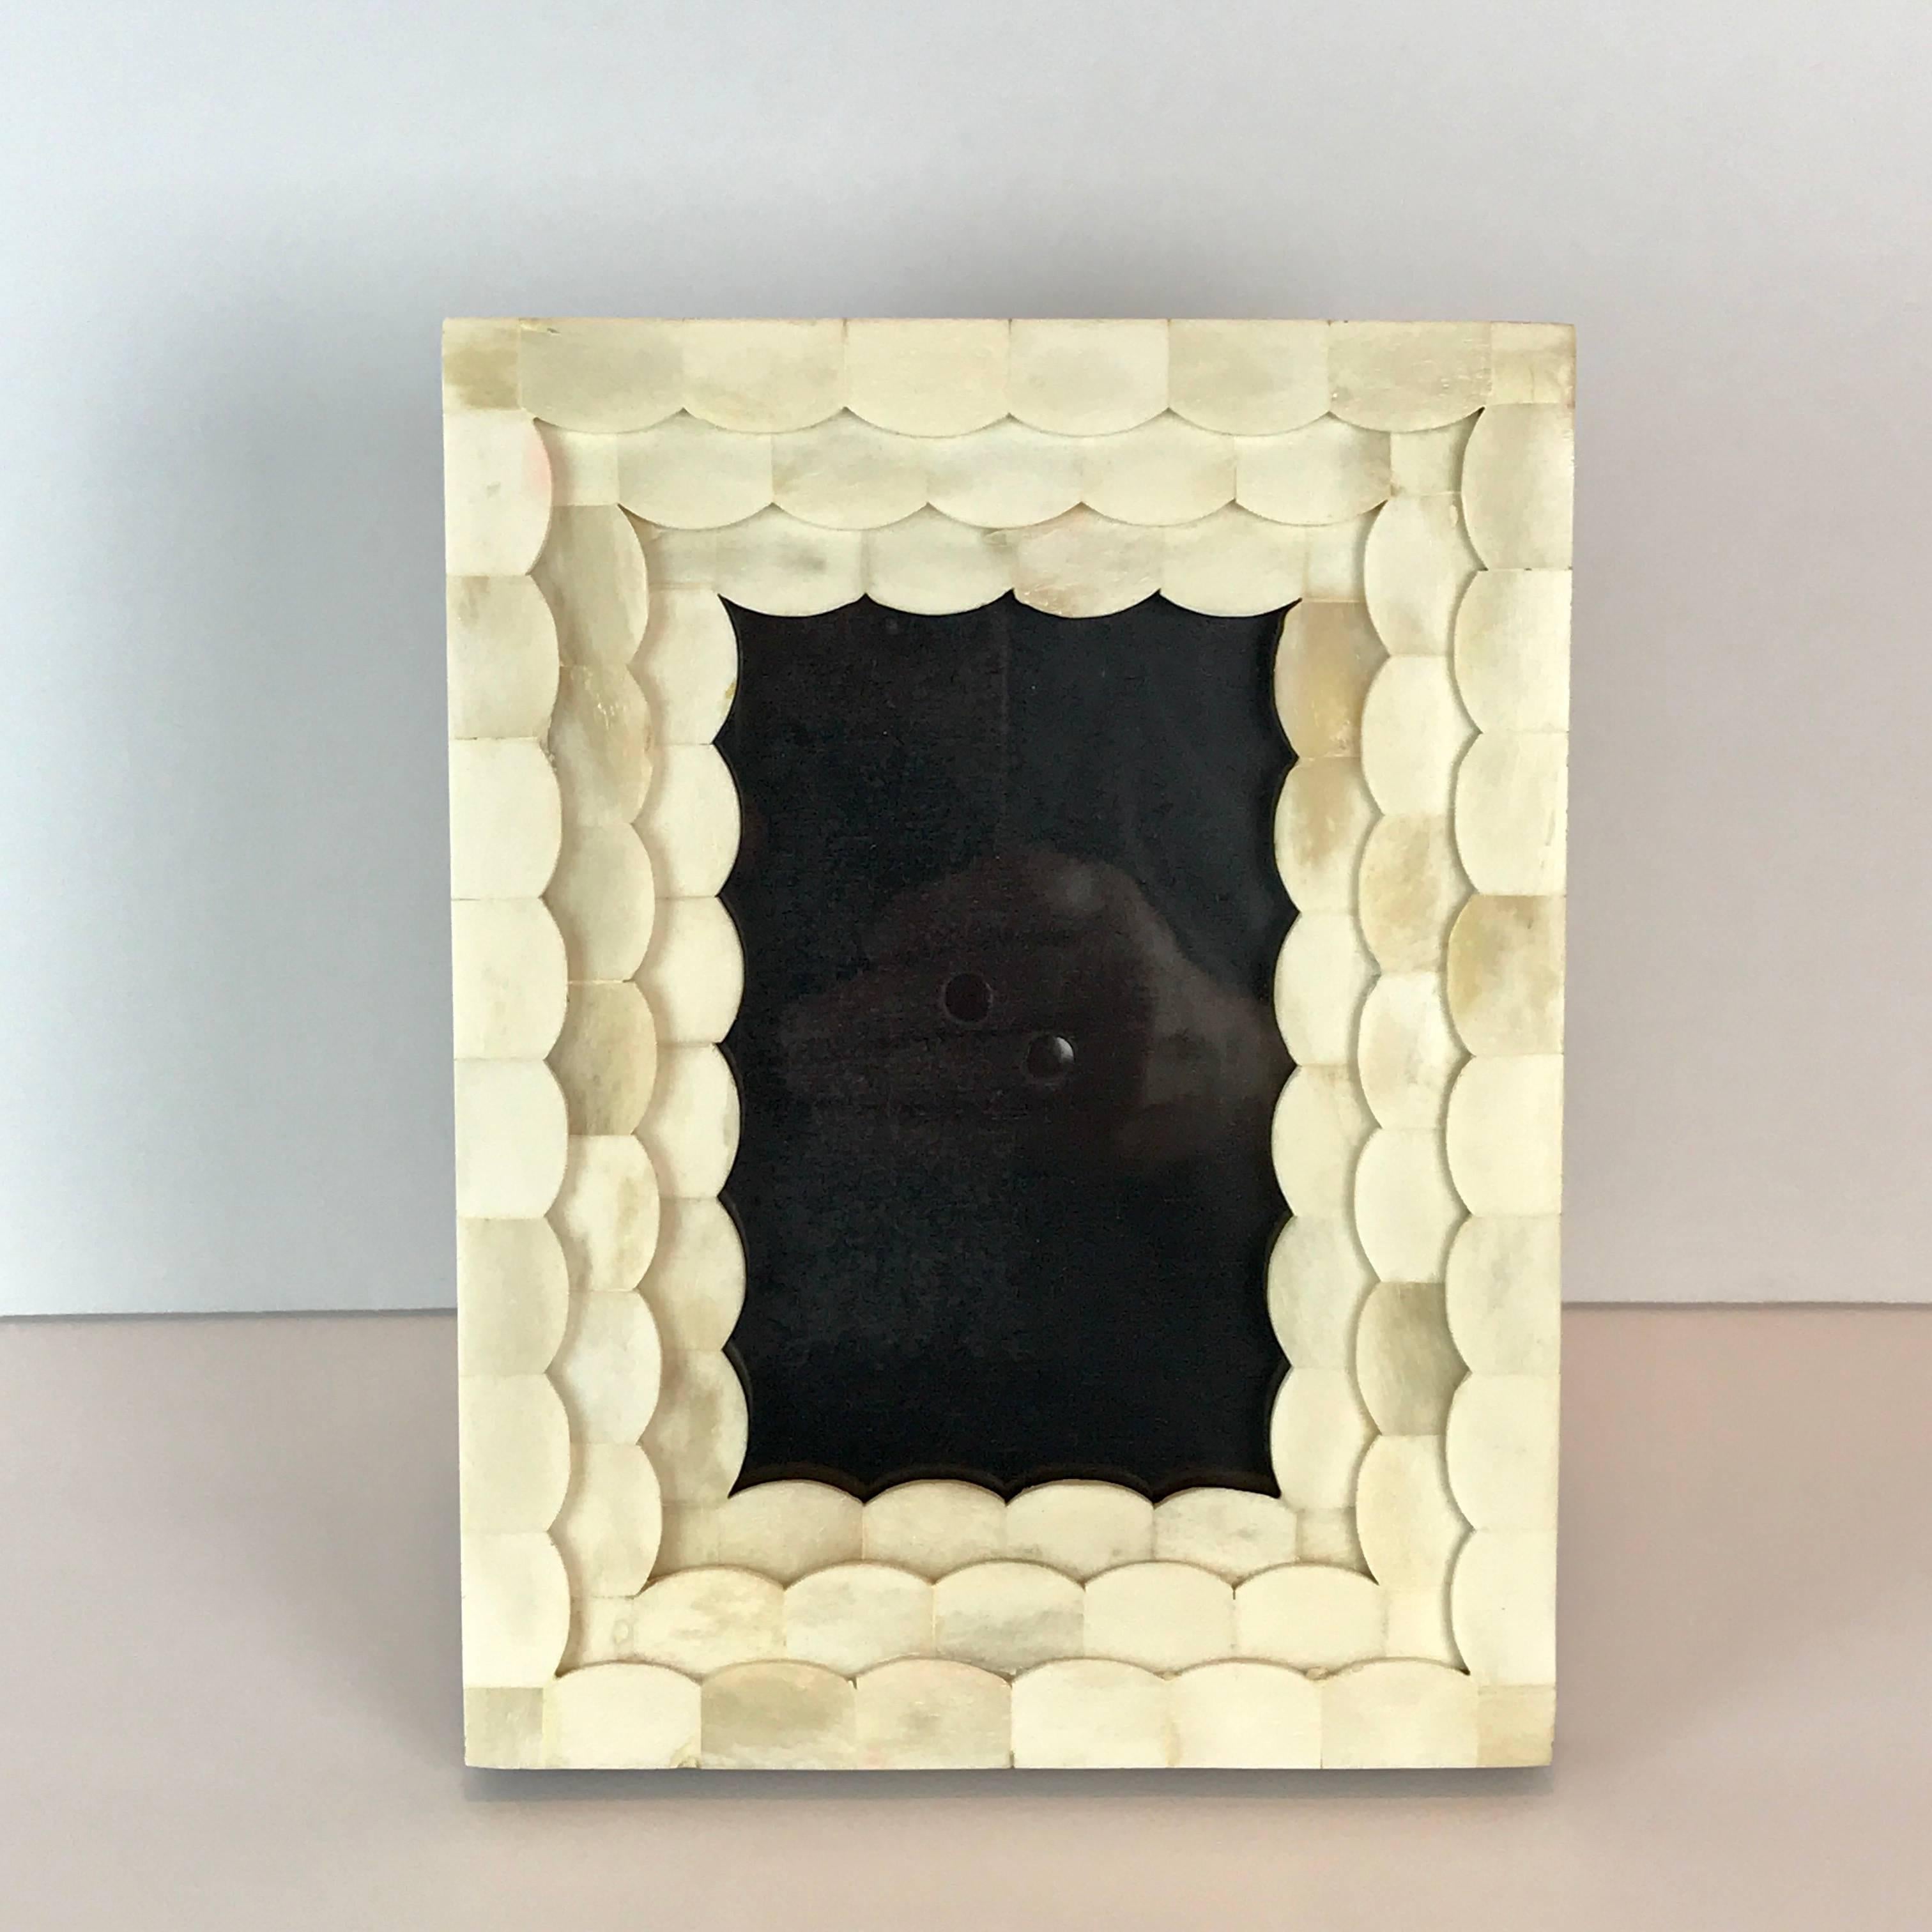 French Art Deco carved bone frame with wood back. Shows a 3